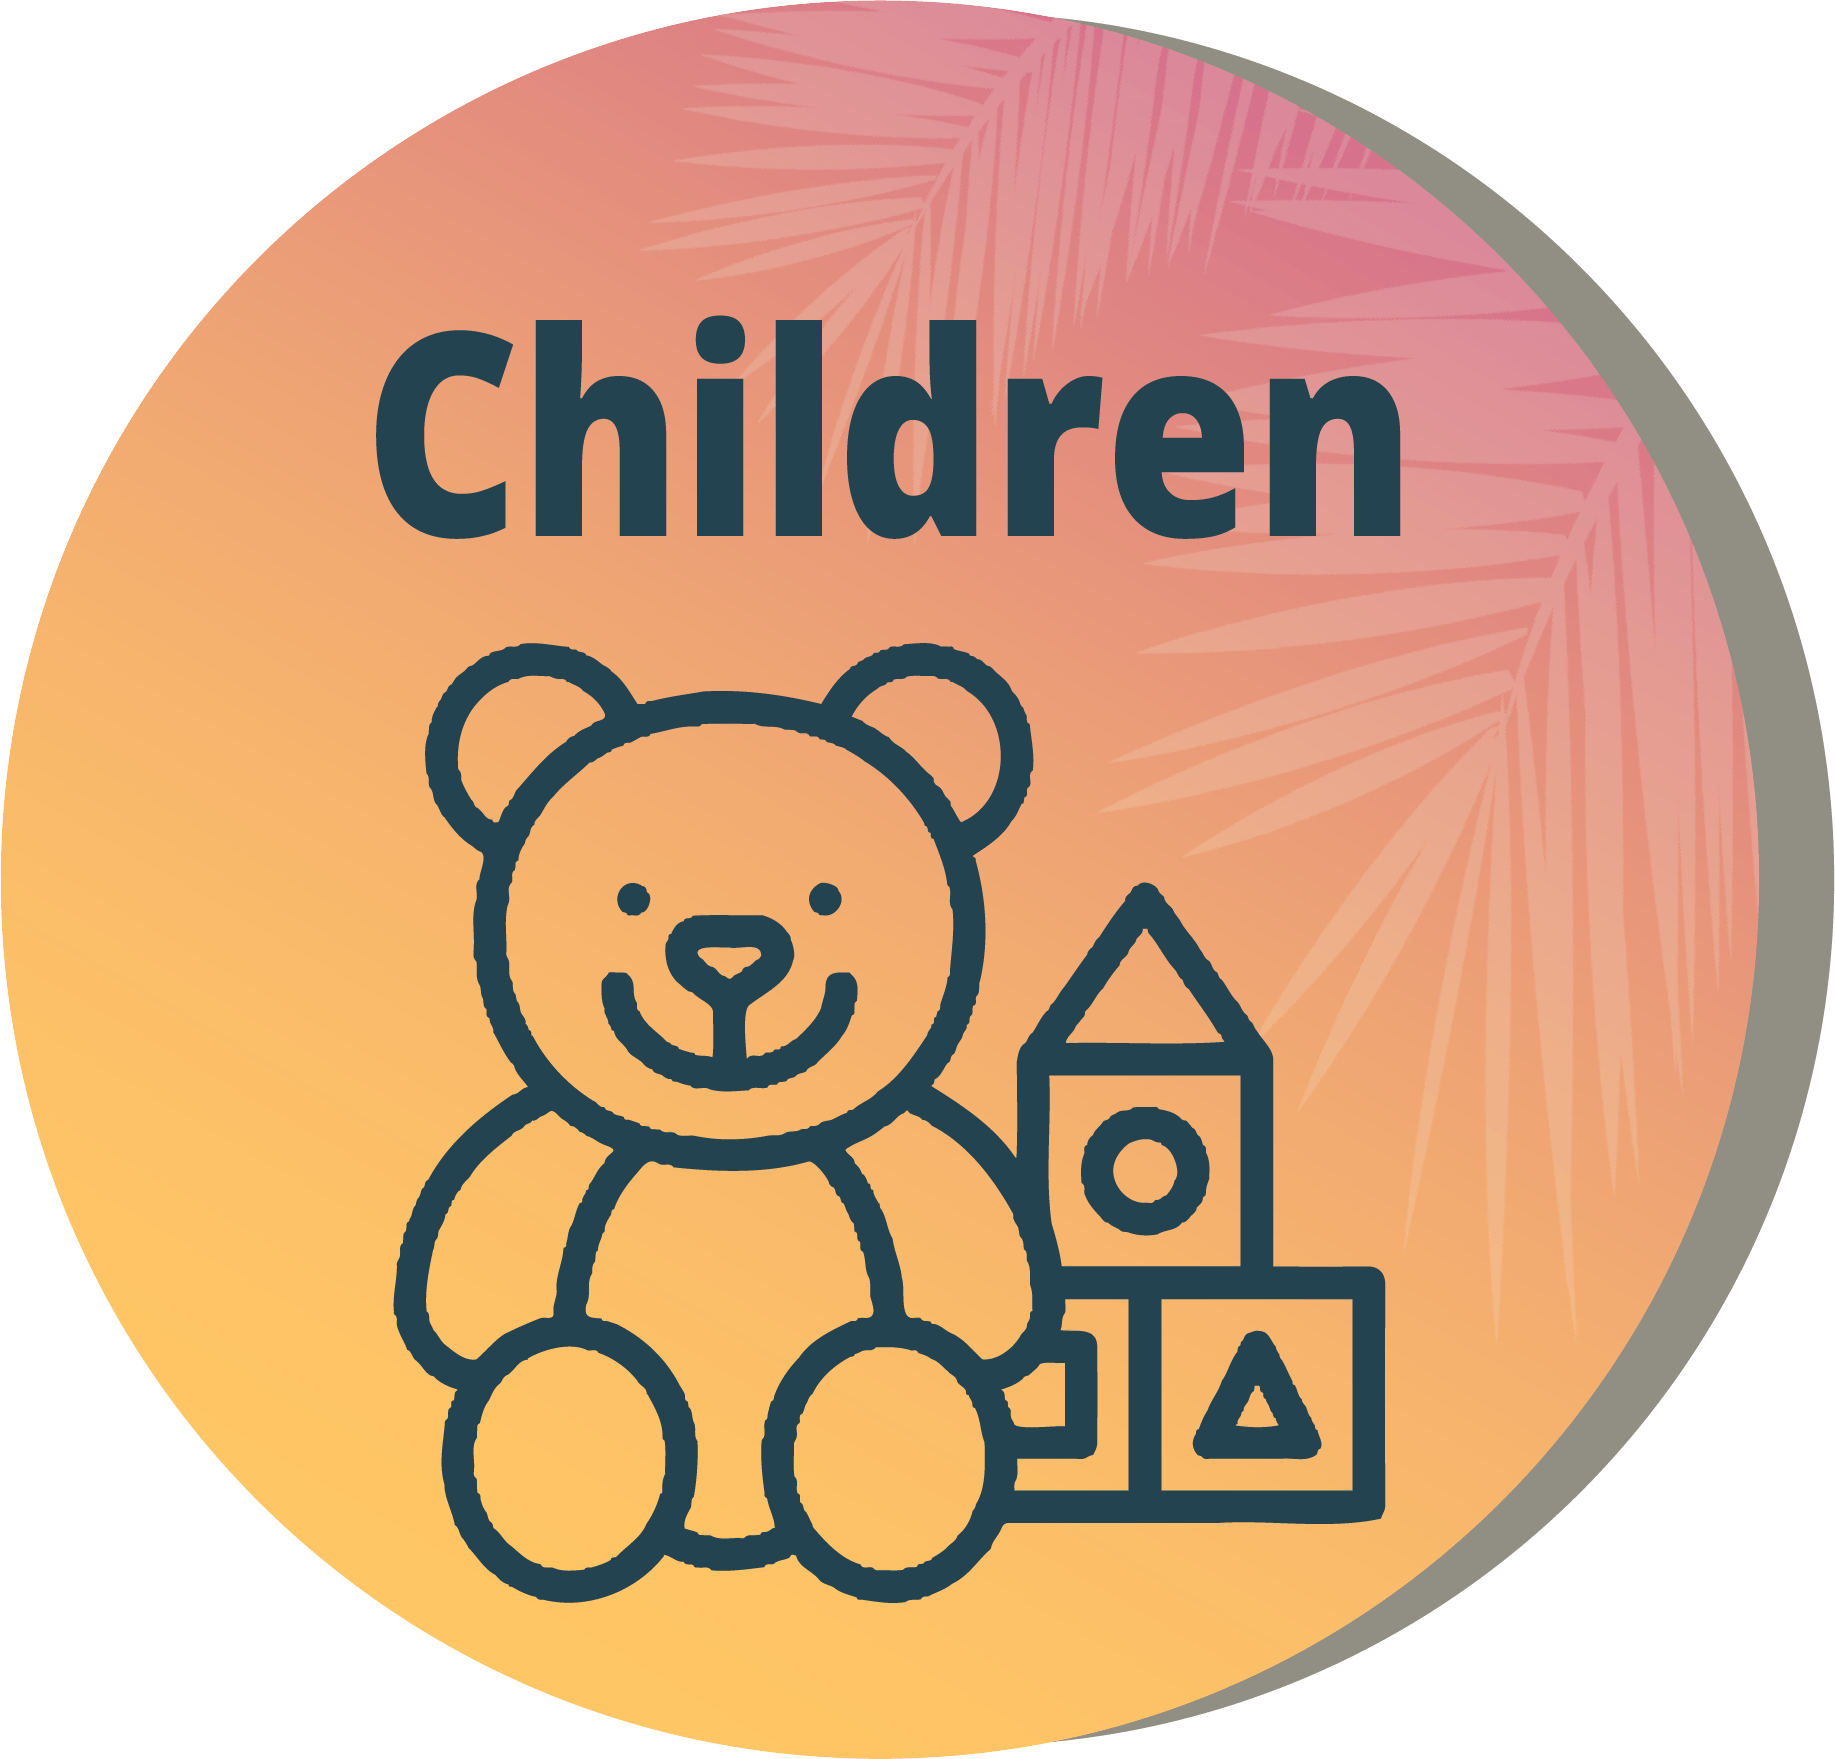 Access our Children's page